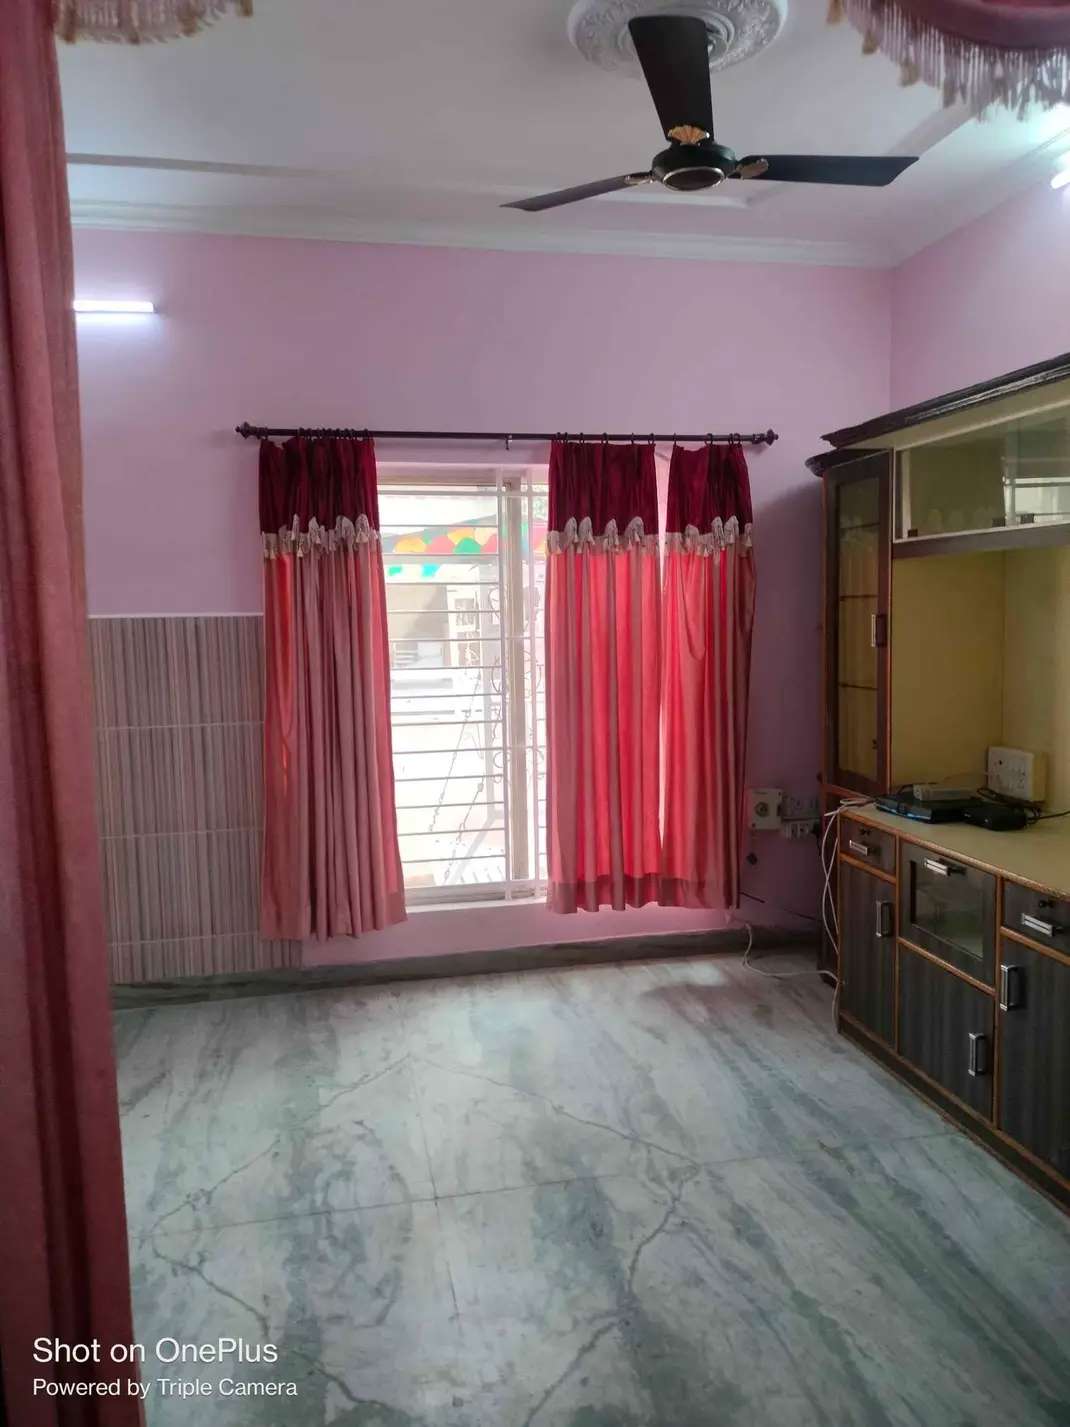 3 Bed/ 3 Bath Rent Apartment/ Flat; 2,050 sq. ft. carpet area, Furnished for rent @Ayodhya bypass road Bhopal